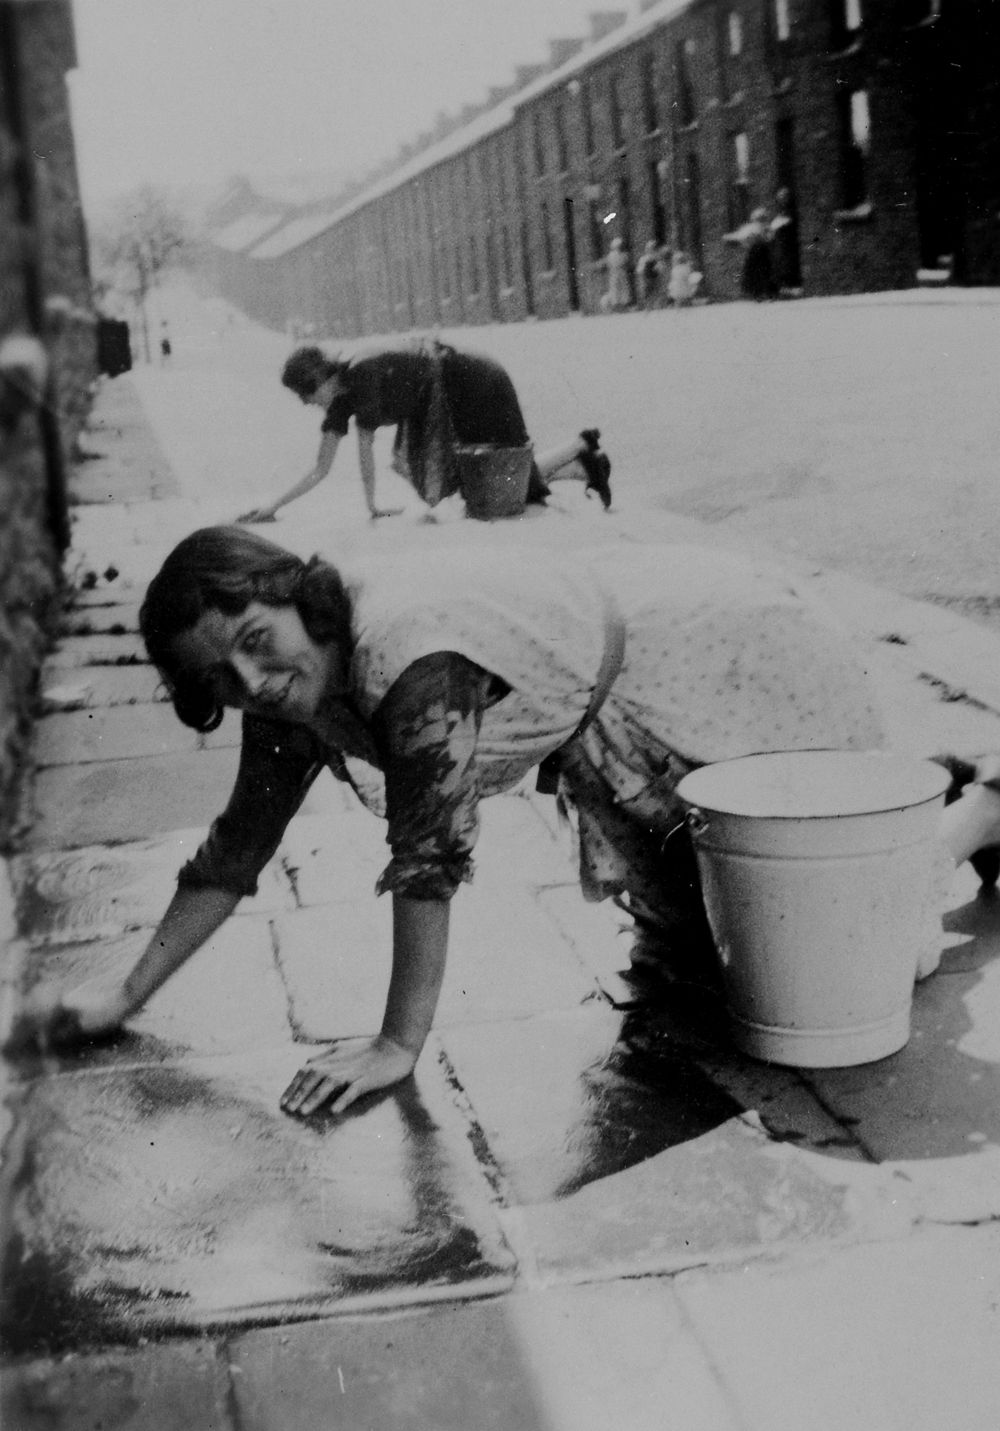 Washing the pavement outside the front door, 1930s.